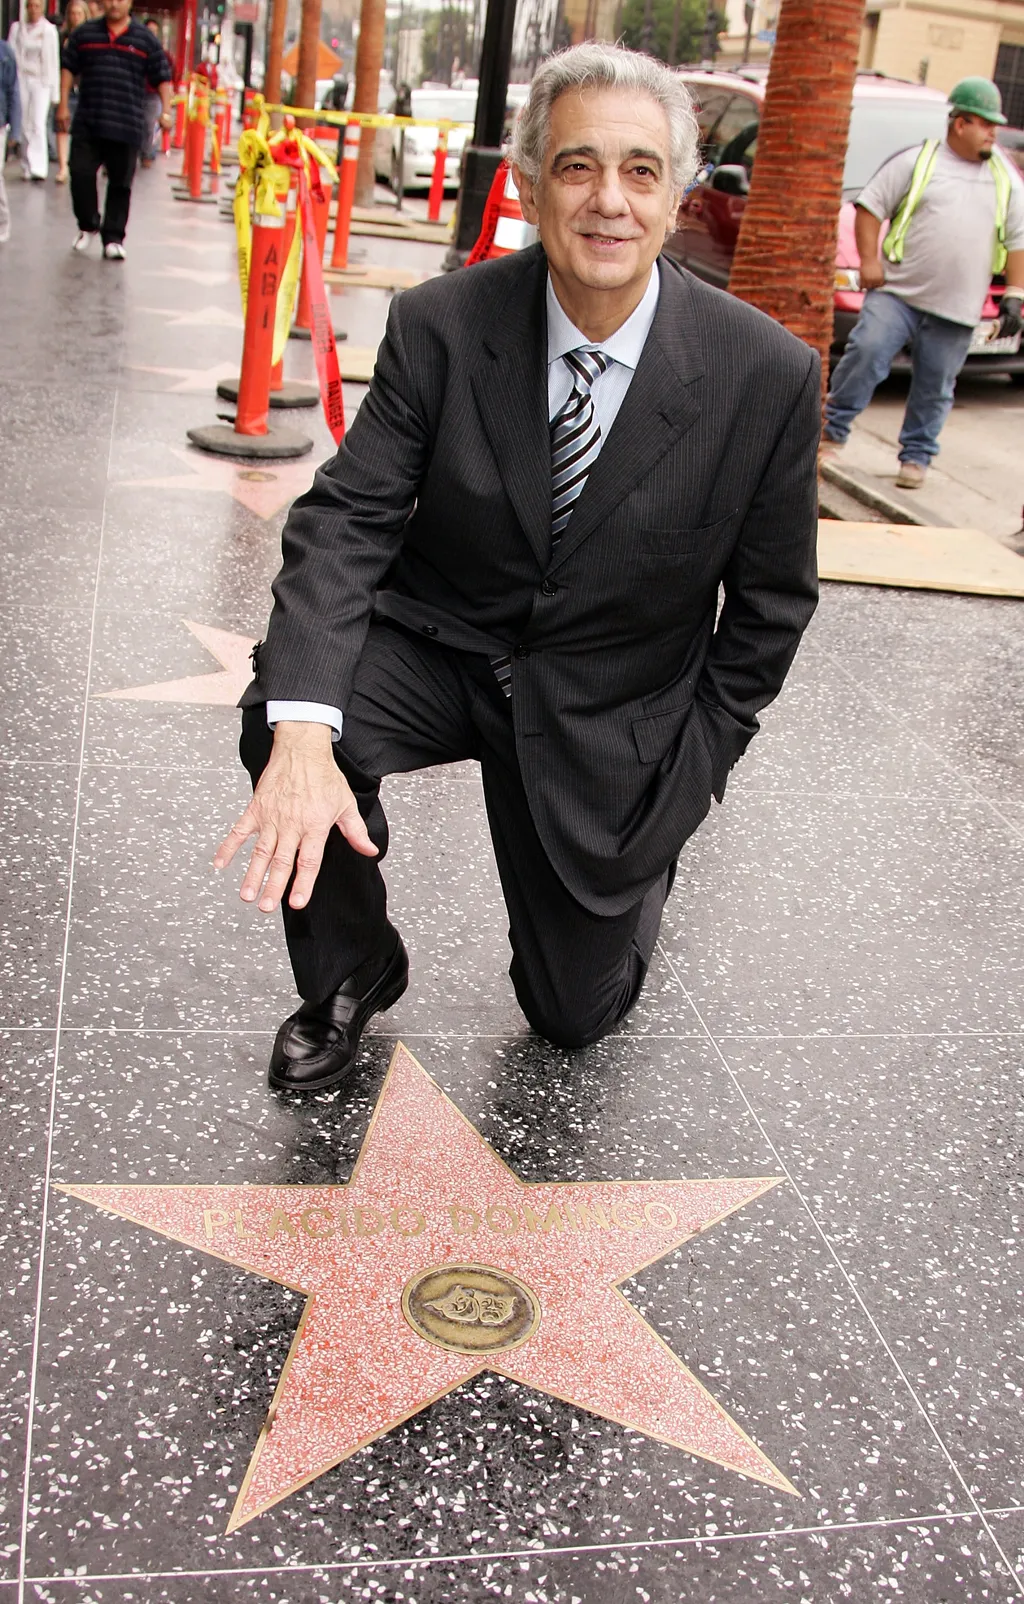 Alejandro Fernandez Honored With A Star On The Walk Of Fame EOS1DMkII-234742 STAR MUSICIAN SINGER Hispanic Spanish Latin MUSIC honoured broadway Hollywood 56306833 